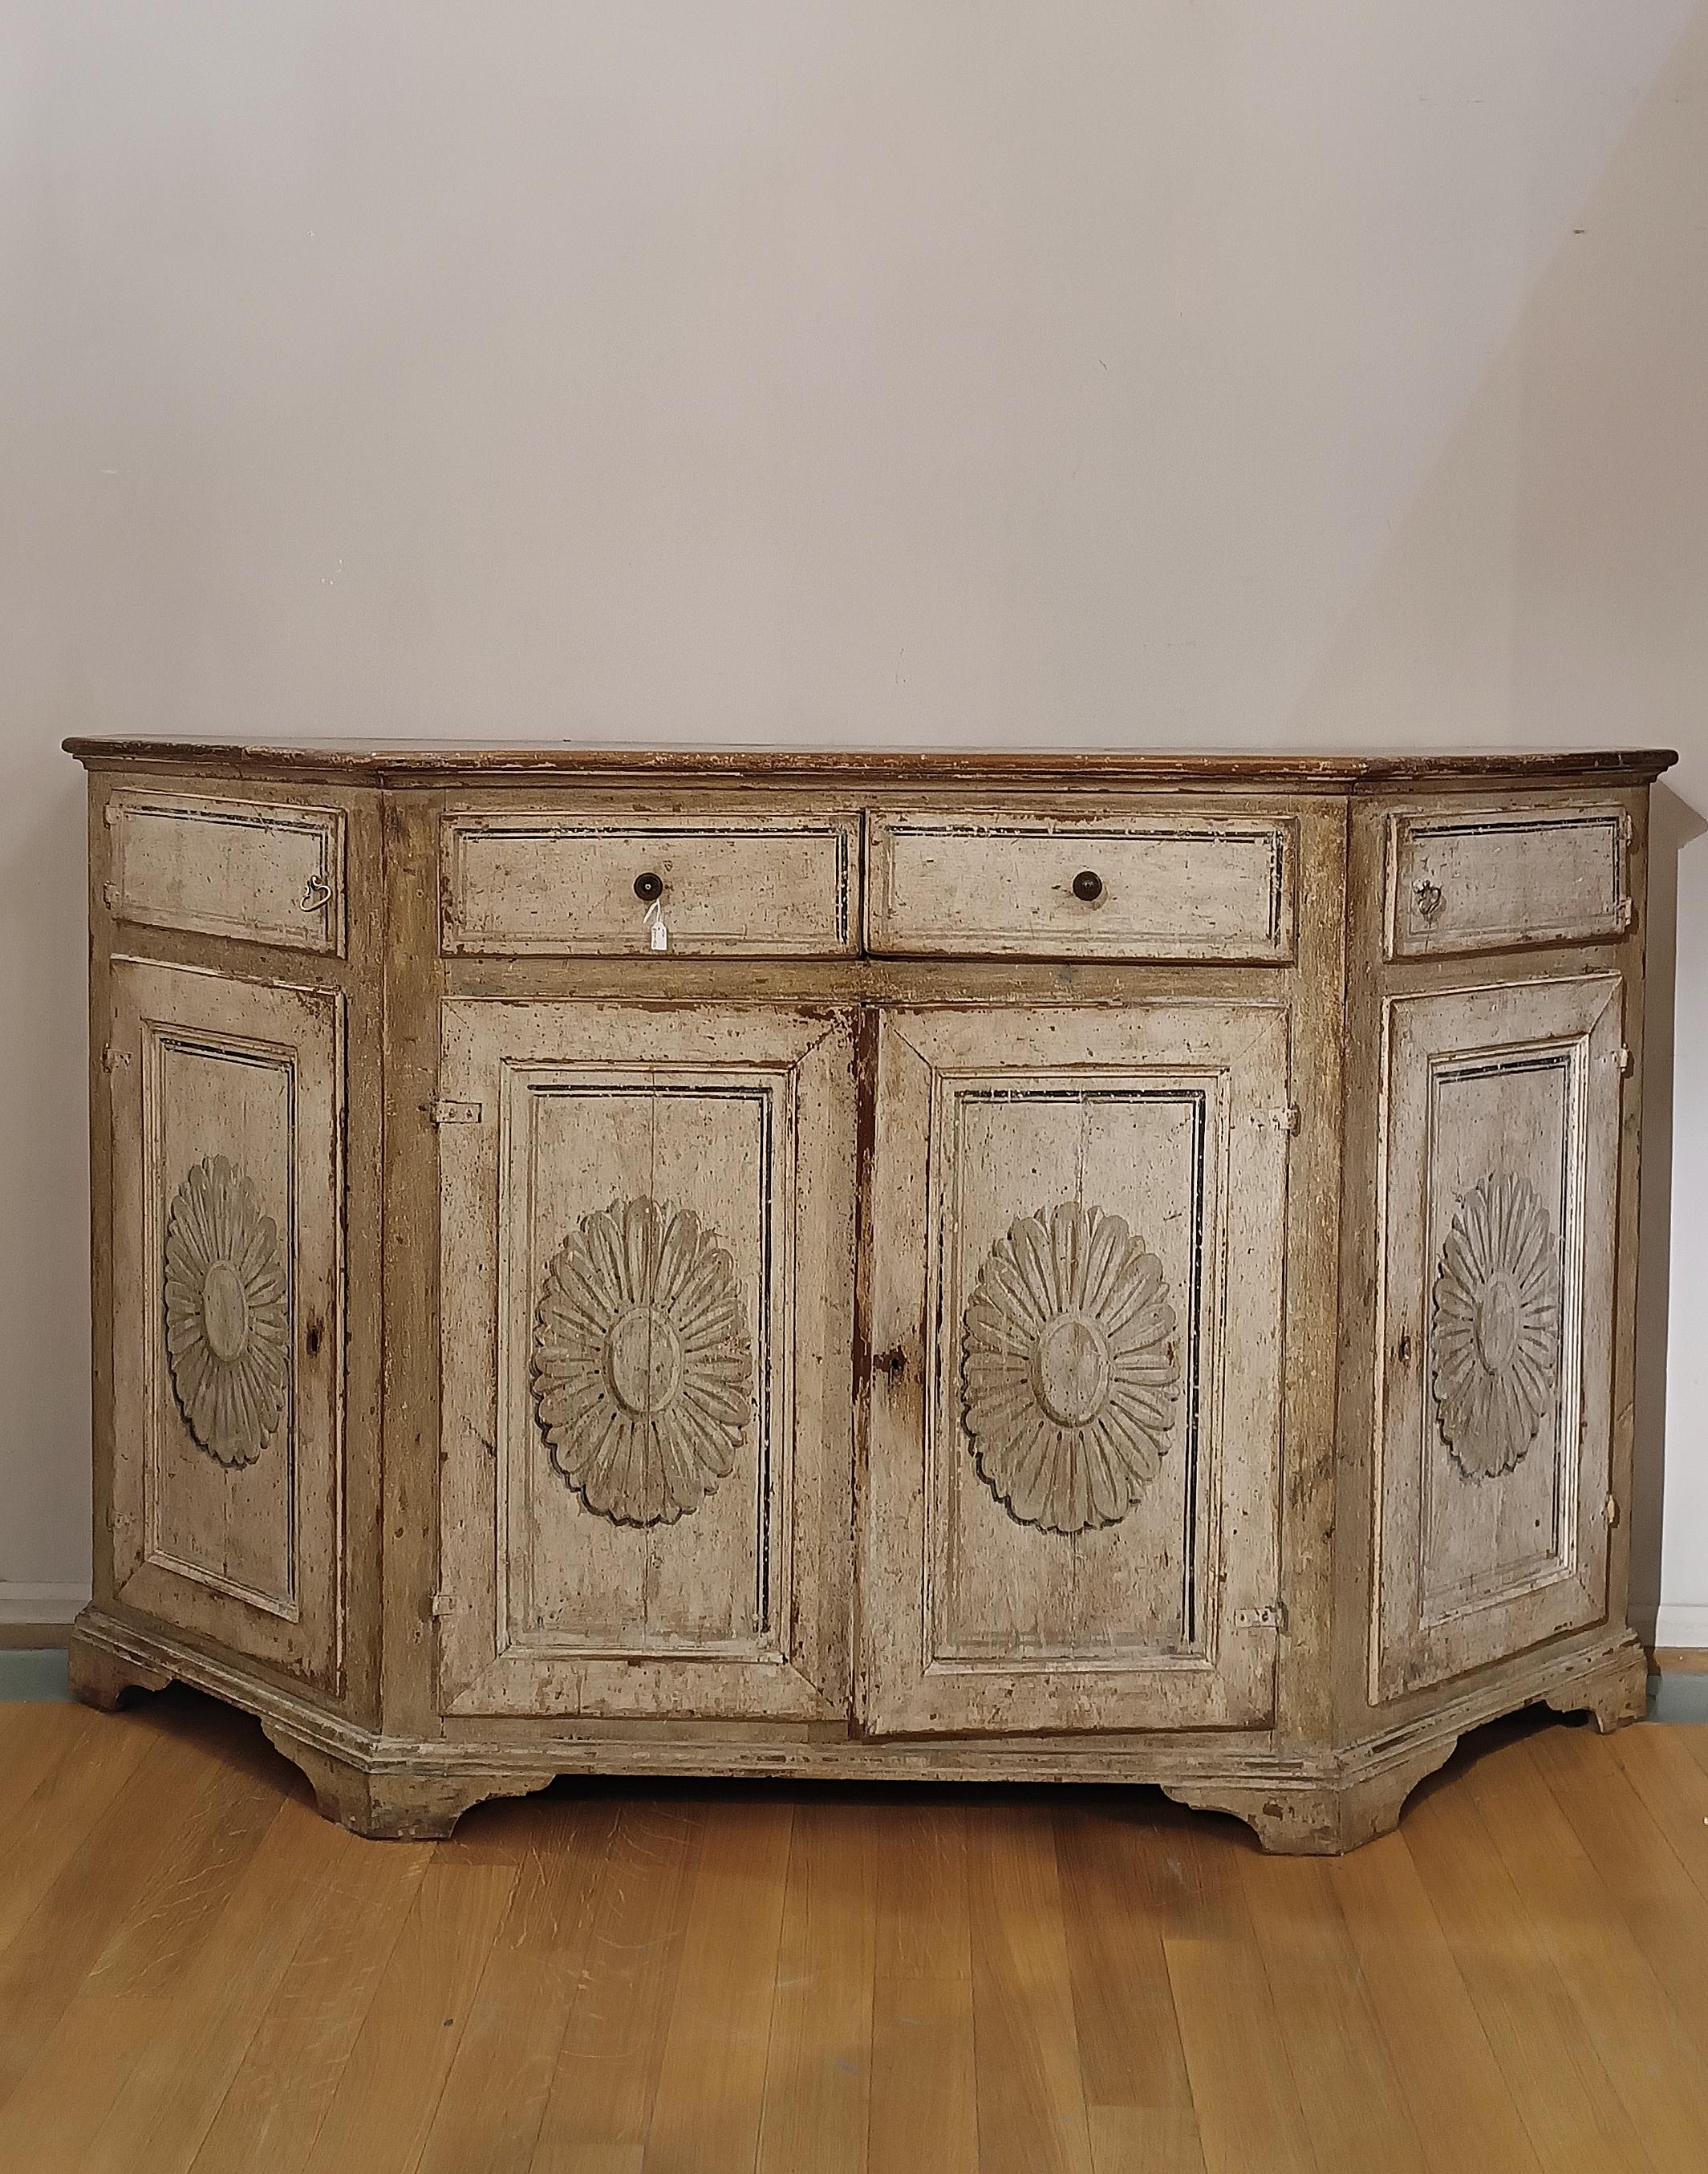 END OF THE 18th CENTURY NEOCLASSICAL SIDEBOARD IN PAINTED WALNUT 3